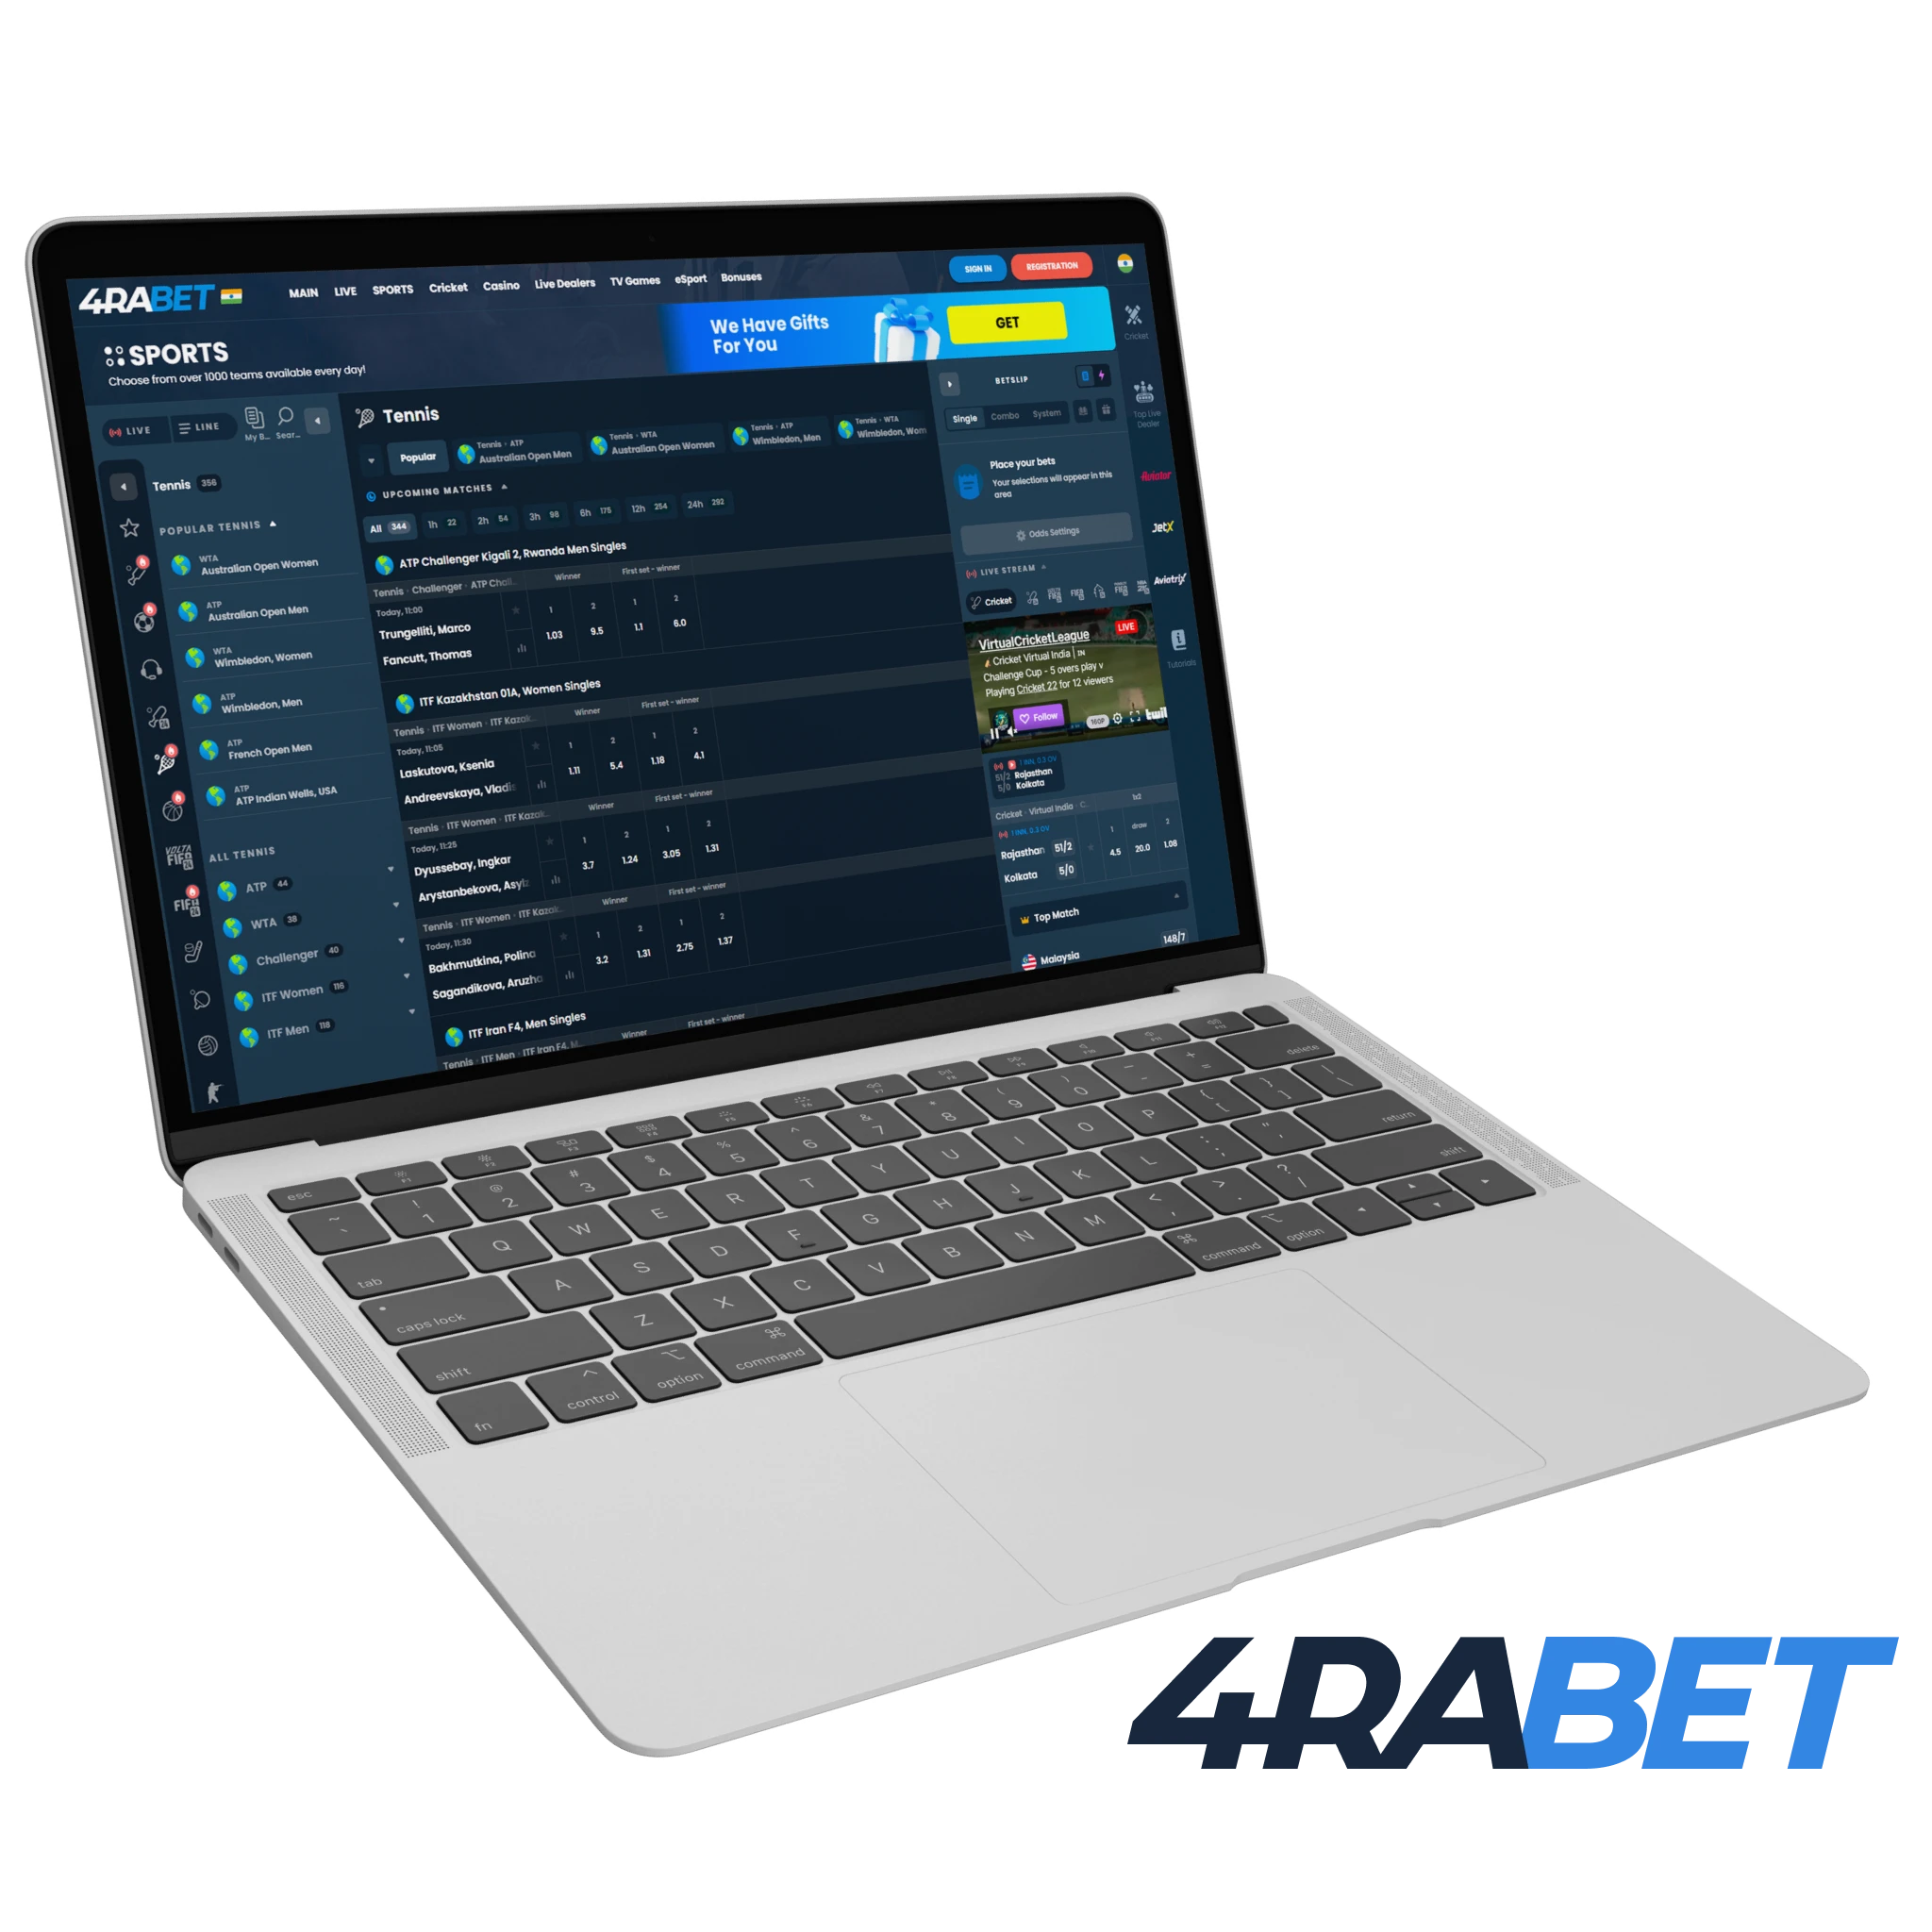 Chess is one of the most popular sports for betting on 4rabet.